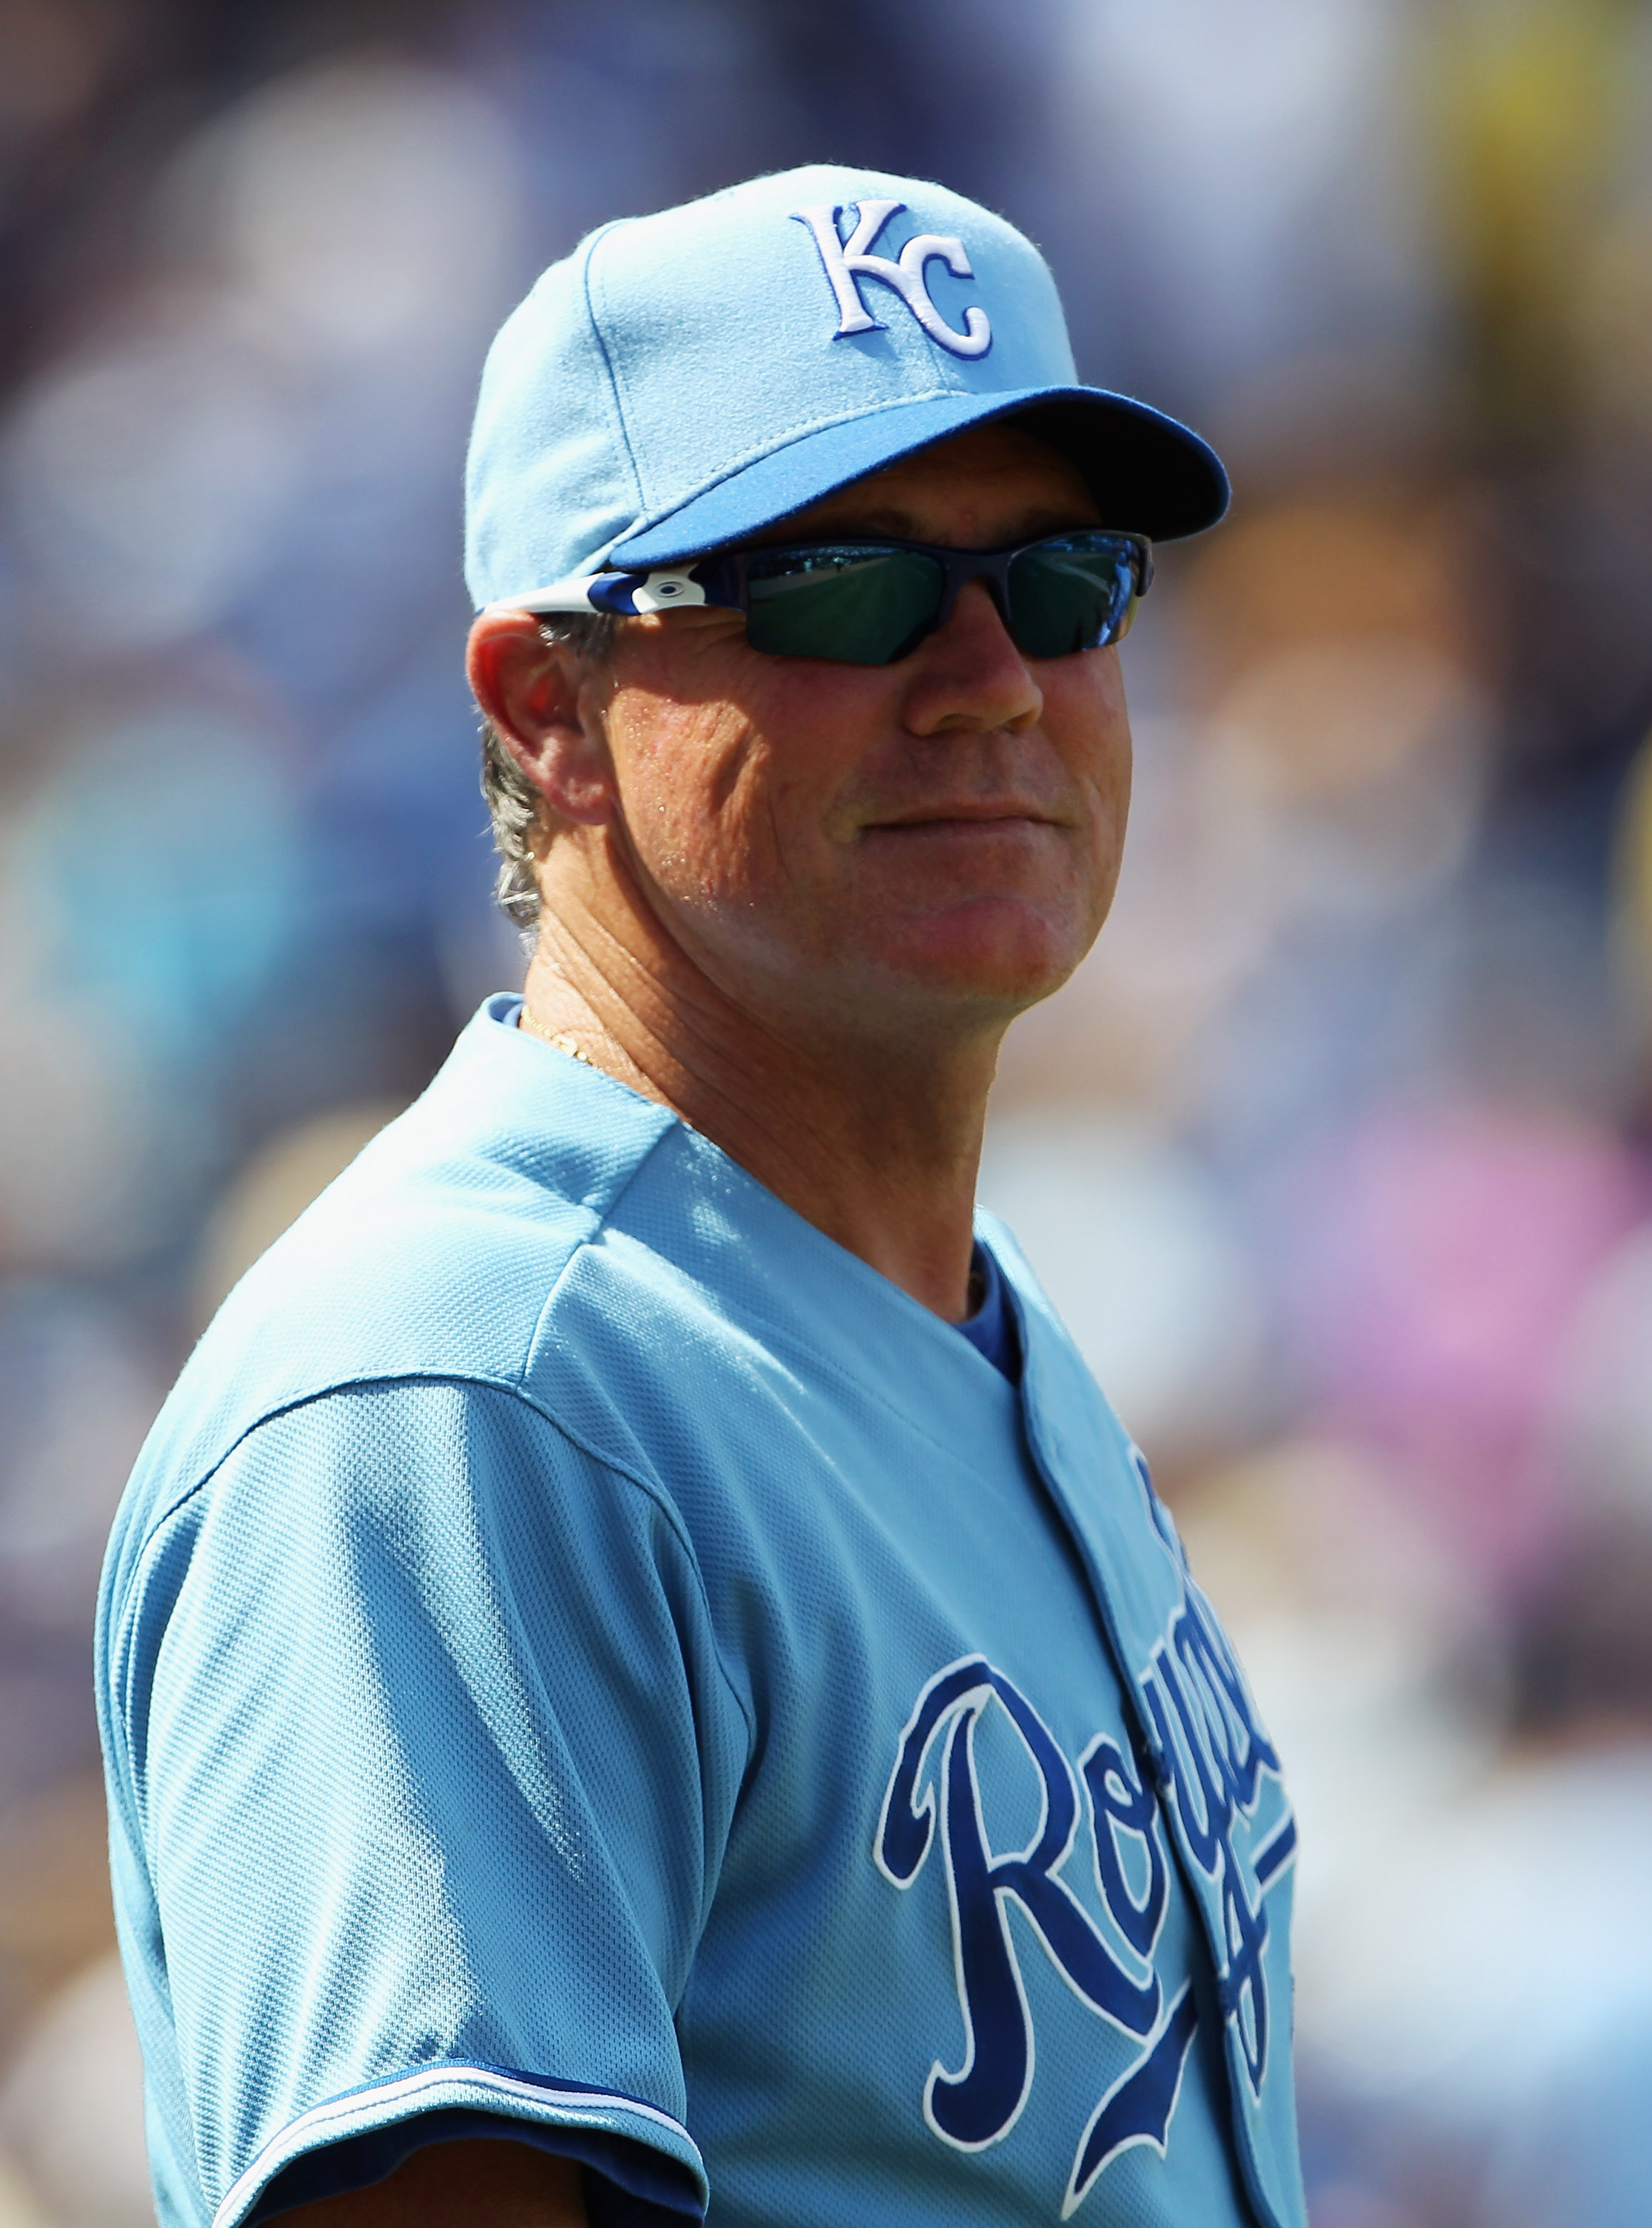 KANSAS CITY, MO - AUGUST 15:  Manager Ned Yost #2 of the Kansas City Royals walks to the mound during the game against the New York Yankees on August 15, 2010 at Kauffman stadium in Kansas City, Missouri.  (Photo by Jamie Squire/Getty Images)